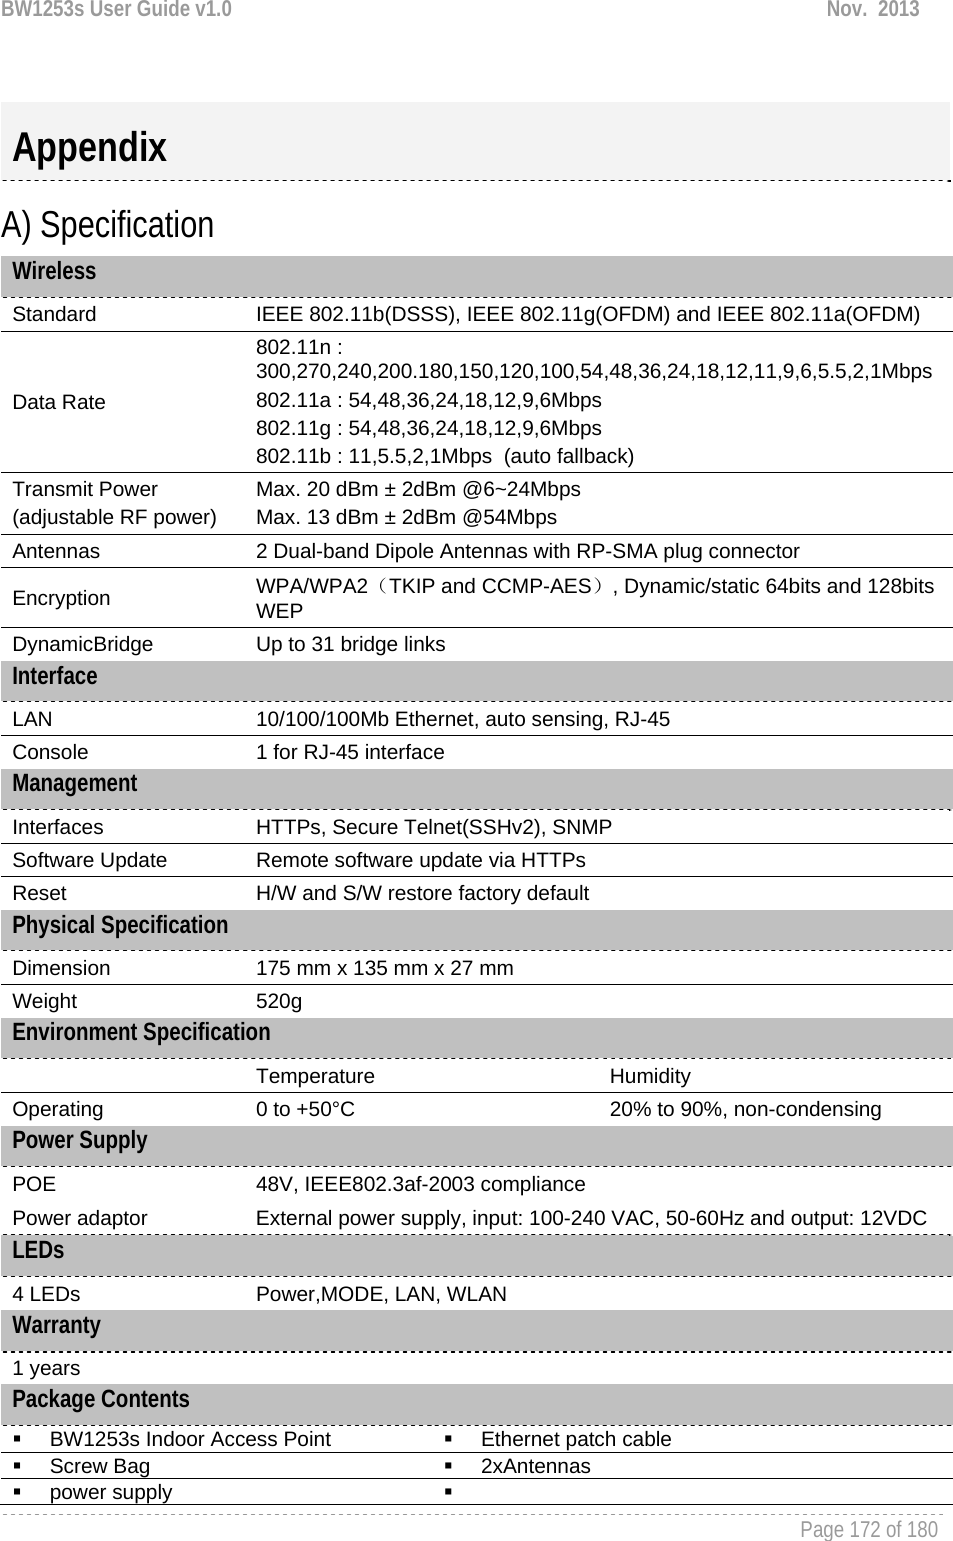 BW1253s User Guide v1.0  Nov.  2013     Page 172 of 180    A) Specification Wireless Standard  IEEE 802.11b(DSSS), IEEE 802.11g(OFDM) and IEEE 802.11a(OFDM) Data Rate 802.11n : 300,270,240,200.180,150,120,100,54,48,36,24,18,12,11,9,6,5.5,2,1Mbps 802.11a : 54,48,36,24,18,12,9,6Mbps 802.11g : 54,48,36,24,18,12,9,6Mbps 802.11b : 11,5.5,2,1Mbps  (auto fallback) Transmit Power (adjustable RF power) Max. 20 dBm ± 2dBm @6~24Mbps Max. 13 dBm ± 2dBm @54Mbps  Antennas  2 Dual-band Dipole Antennas with RP-SMA plug connector Encryption  WPA/WPA2（TKIP and CCMP-AES）, Dynamic/static 64bits and 128bits WEP DynamicBridge   Up to 31 bridge links Interface LAN  10/100/100Mb Ethernet, auto sensing, RJ-45 Console  1 for RJ-45 interface Management Interfaces  HTTPs, Secure Telnet(SSHv2), SNMP Software Update  Remote software update via HTTPs Reset  H/W and S/W restore factory default Physical Specification Dimension   175 mm x 135 mm x 27 mm  Weight  520g Environment Specification  Temperature  Humidity Operating  0 to +50°C  20% to 90%, non-condensing Power Supply POE  48V, IEEE802.3af-2003 compliance Power adaptor  External power supply, input: 100-240 VAC, 50-60Hz and output: 12VDC LEDs 4 LEDs  Power,MODE, LAN, WLAN   Warranty 1 years Package Contents     BW1253s Indoor Access Point    Ethernet patch cable  Screw Bag   2xAntennas  power supply    Appendix 